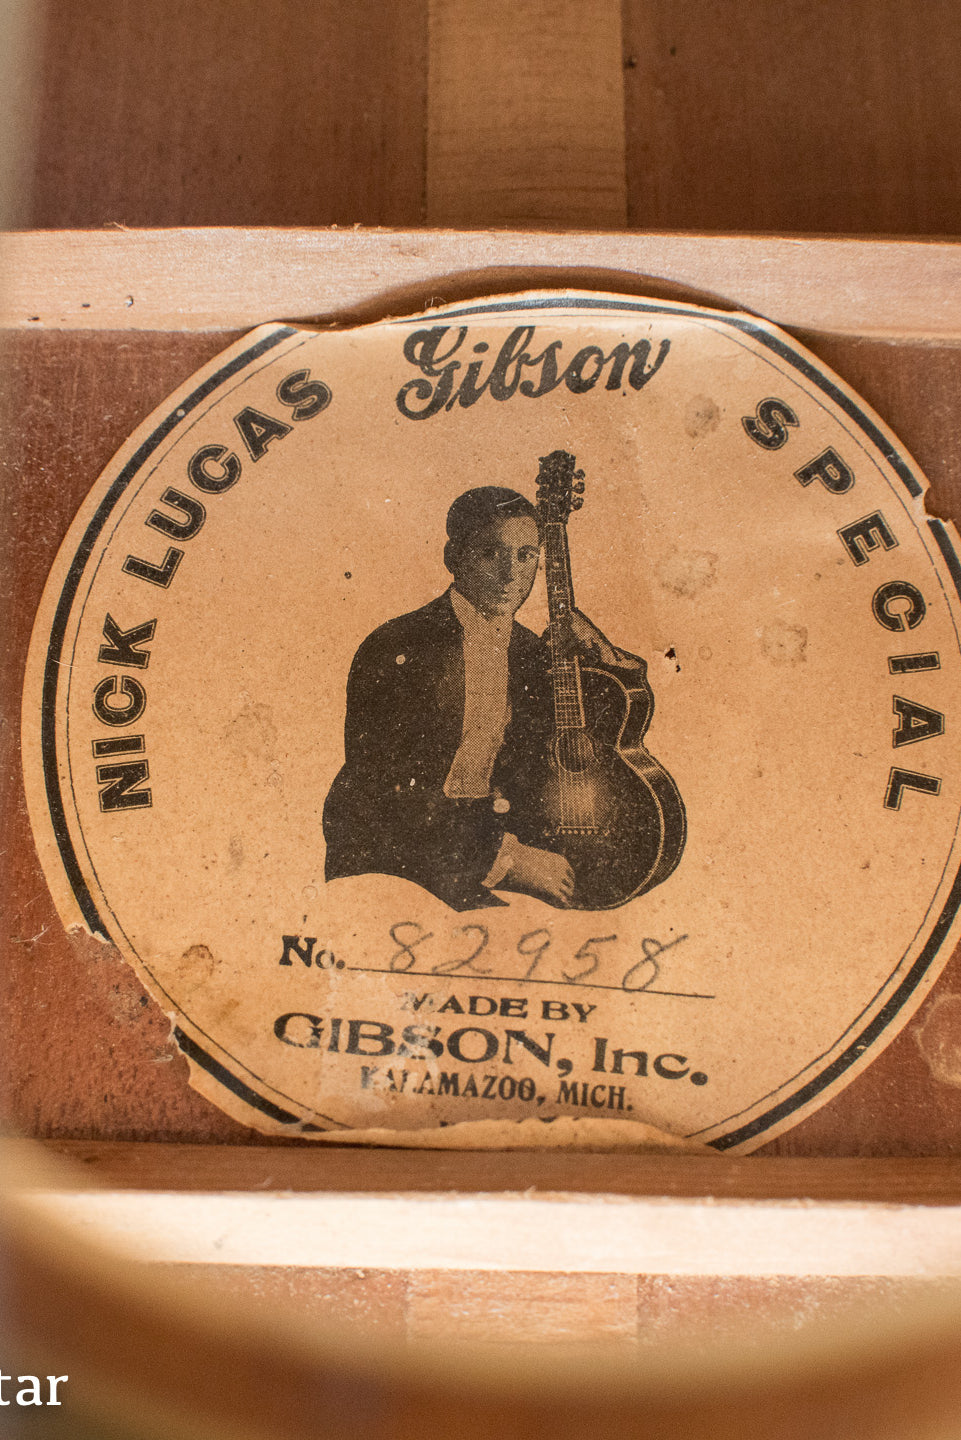 1928 Gibson Nick Lucas Special, paper label